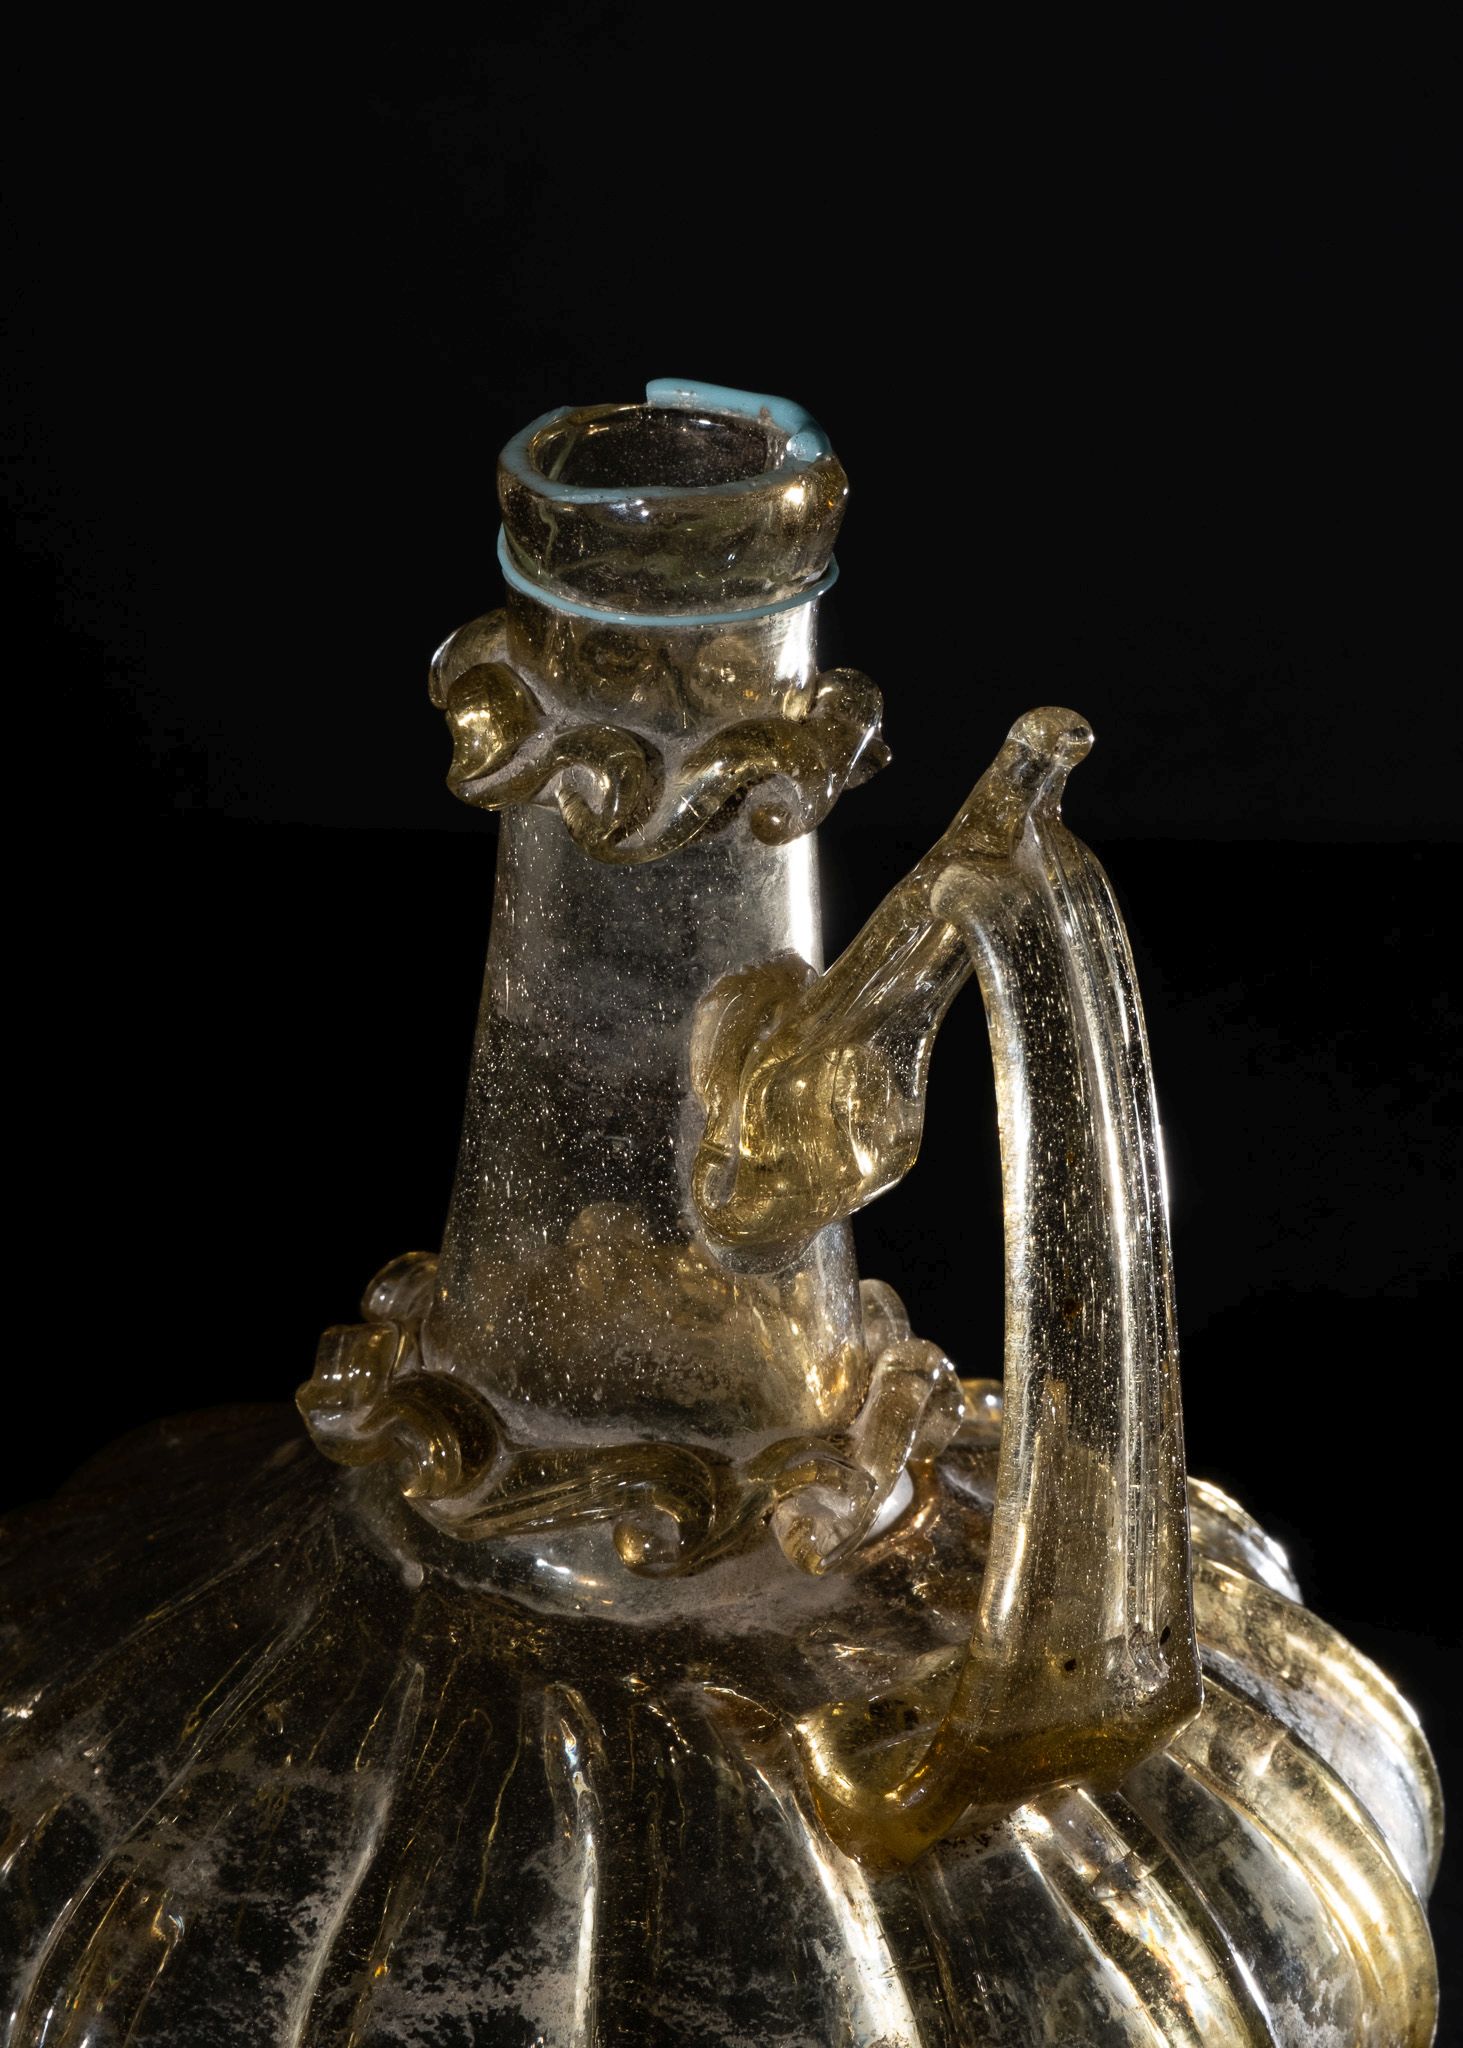 A HIGHLY RARE FATIMID FLUTED YELLOW GLASS EWER, CIRCA 10TH CENTURY, EGYPT - Image 2 of 2